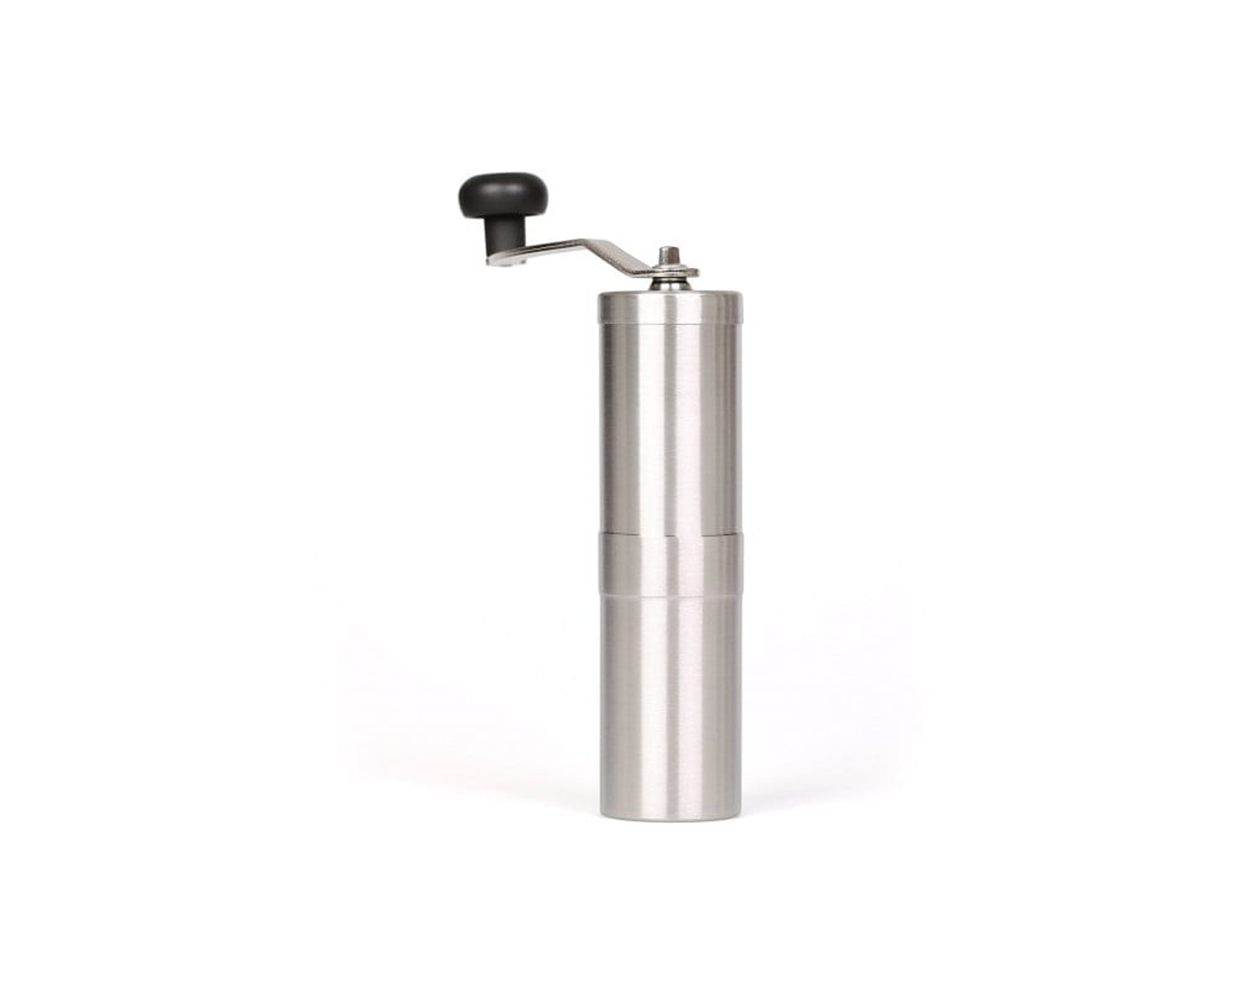 Service Ideas 1 L Stainless Steel Thermal Carafe With Black Skim Milk  Imprint